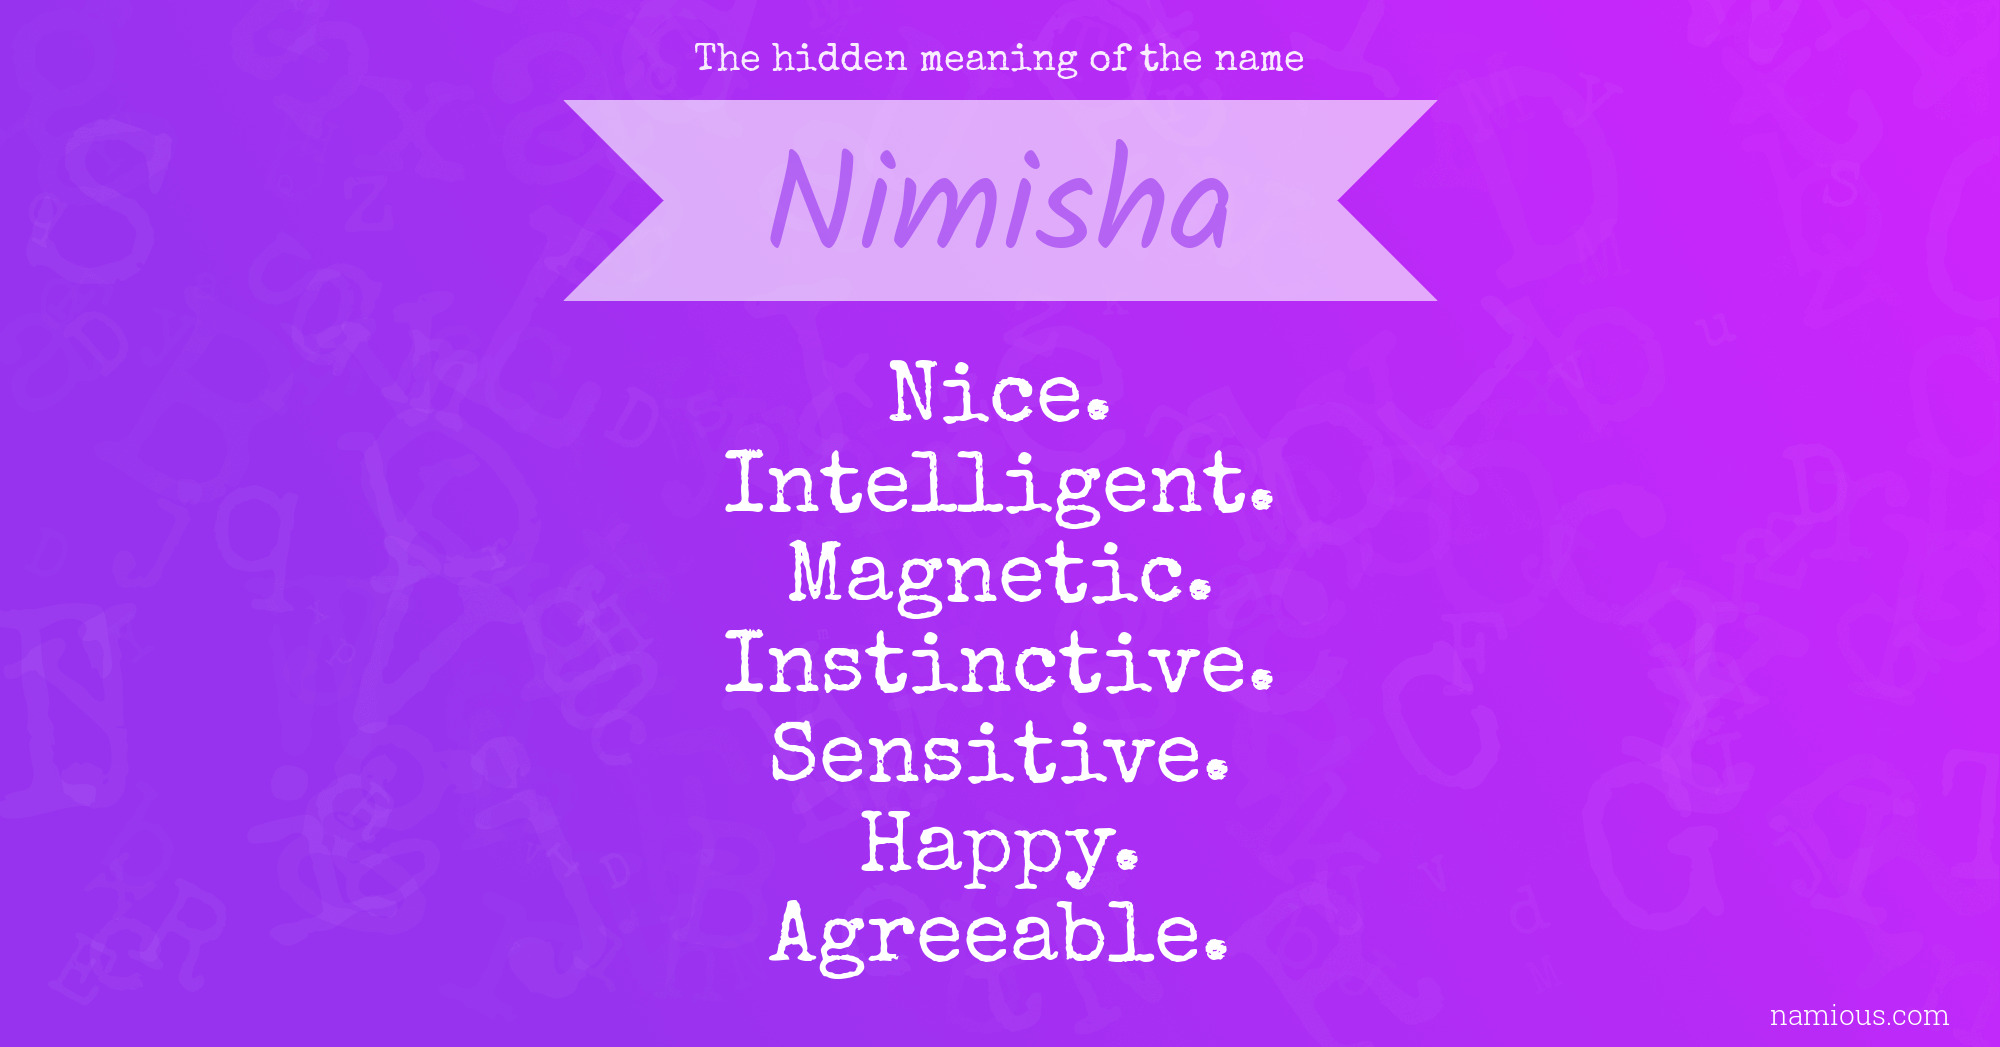 The hidden meaning of the name Nimisha